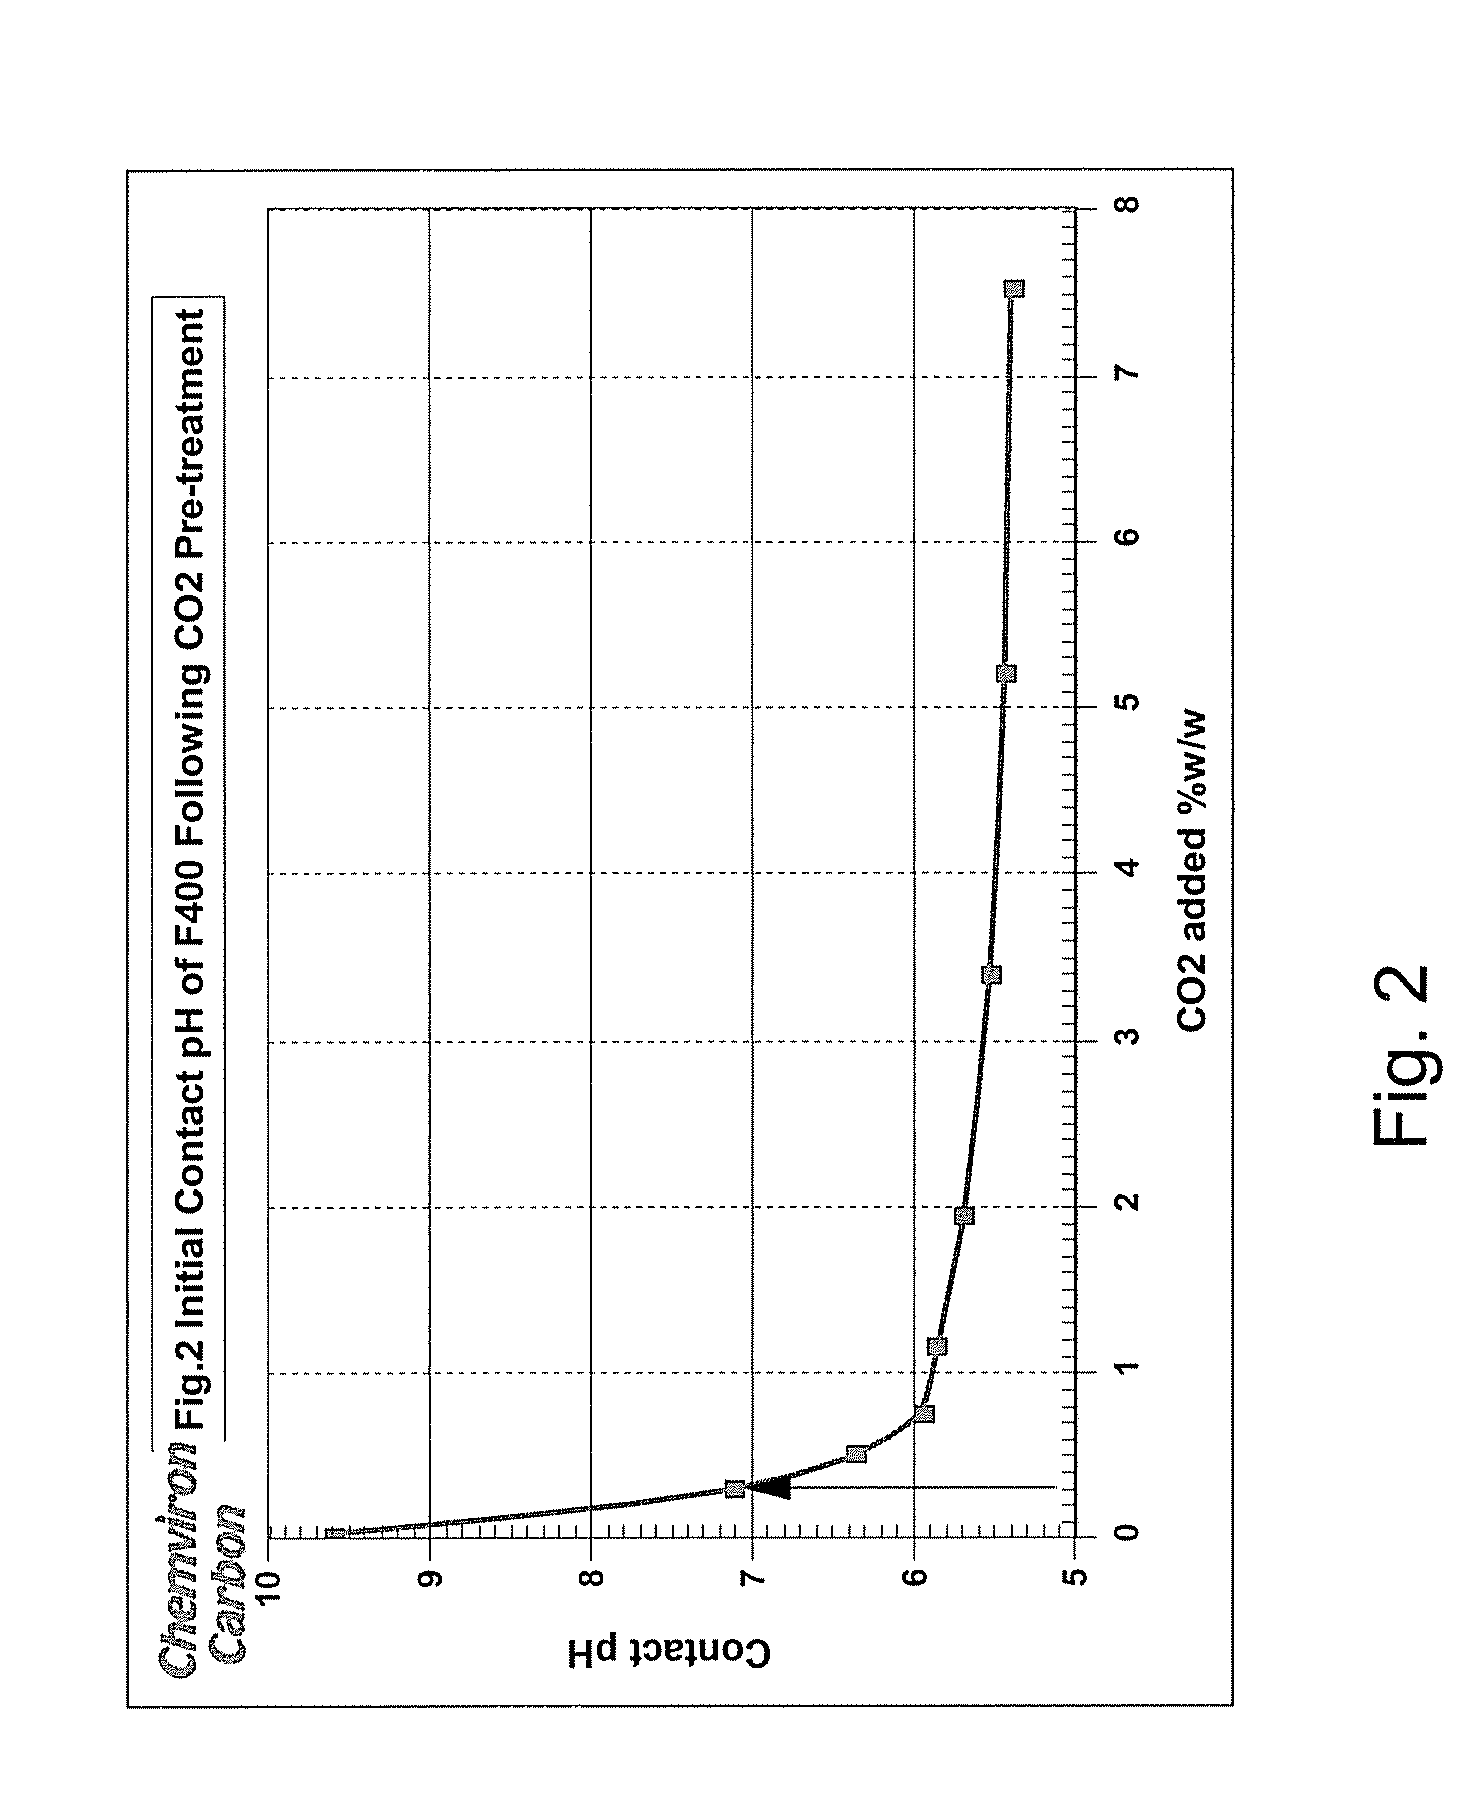 Carbon pre-treatment for the stabilization of ph in water treatment